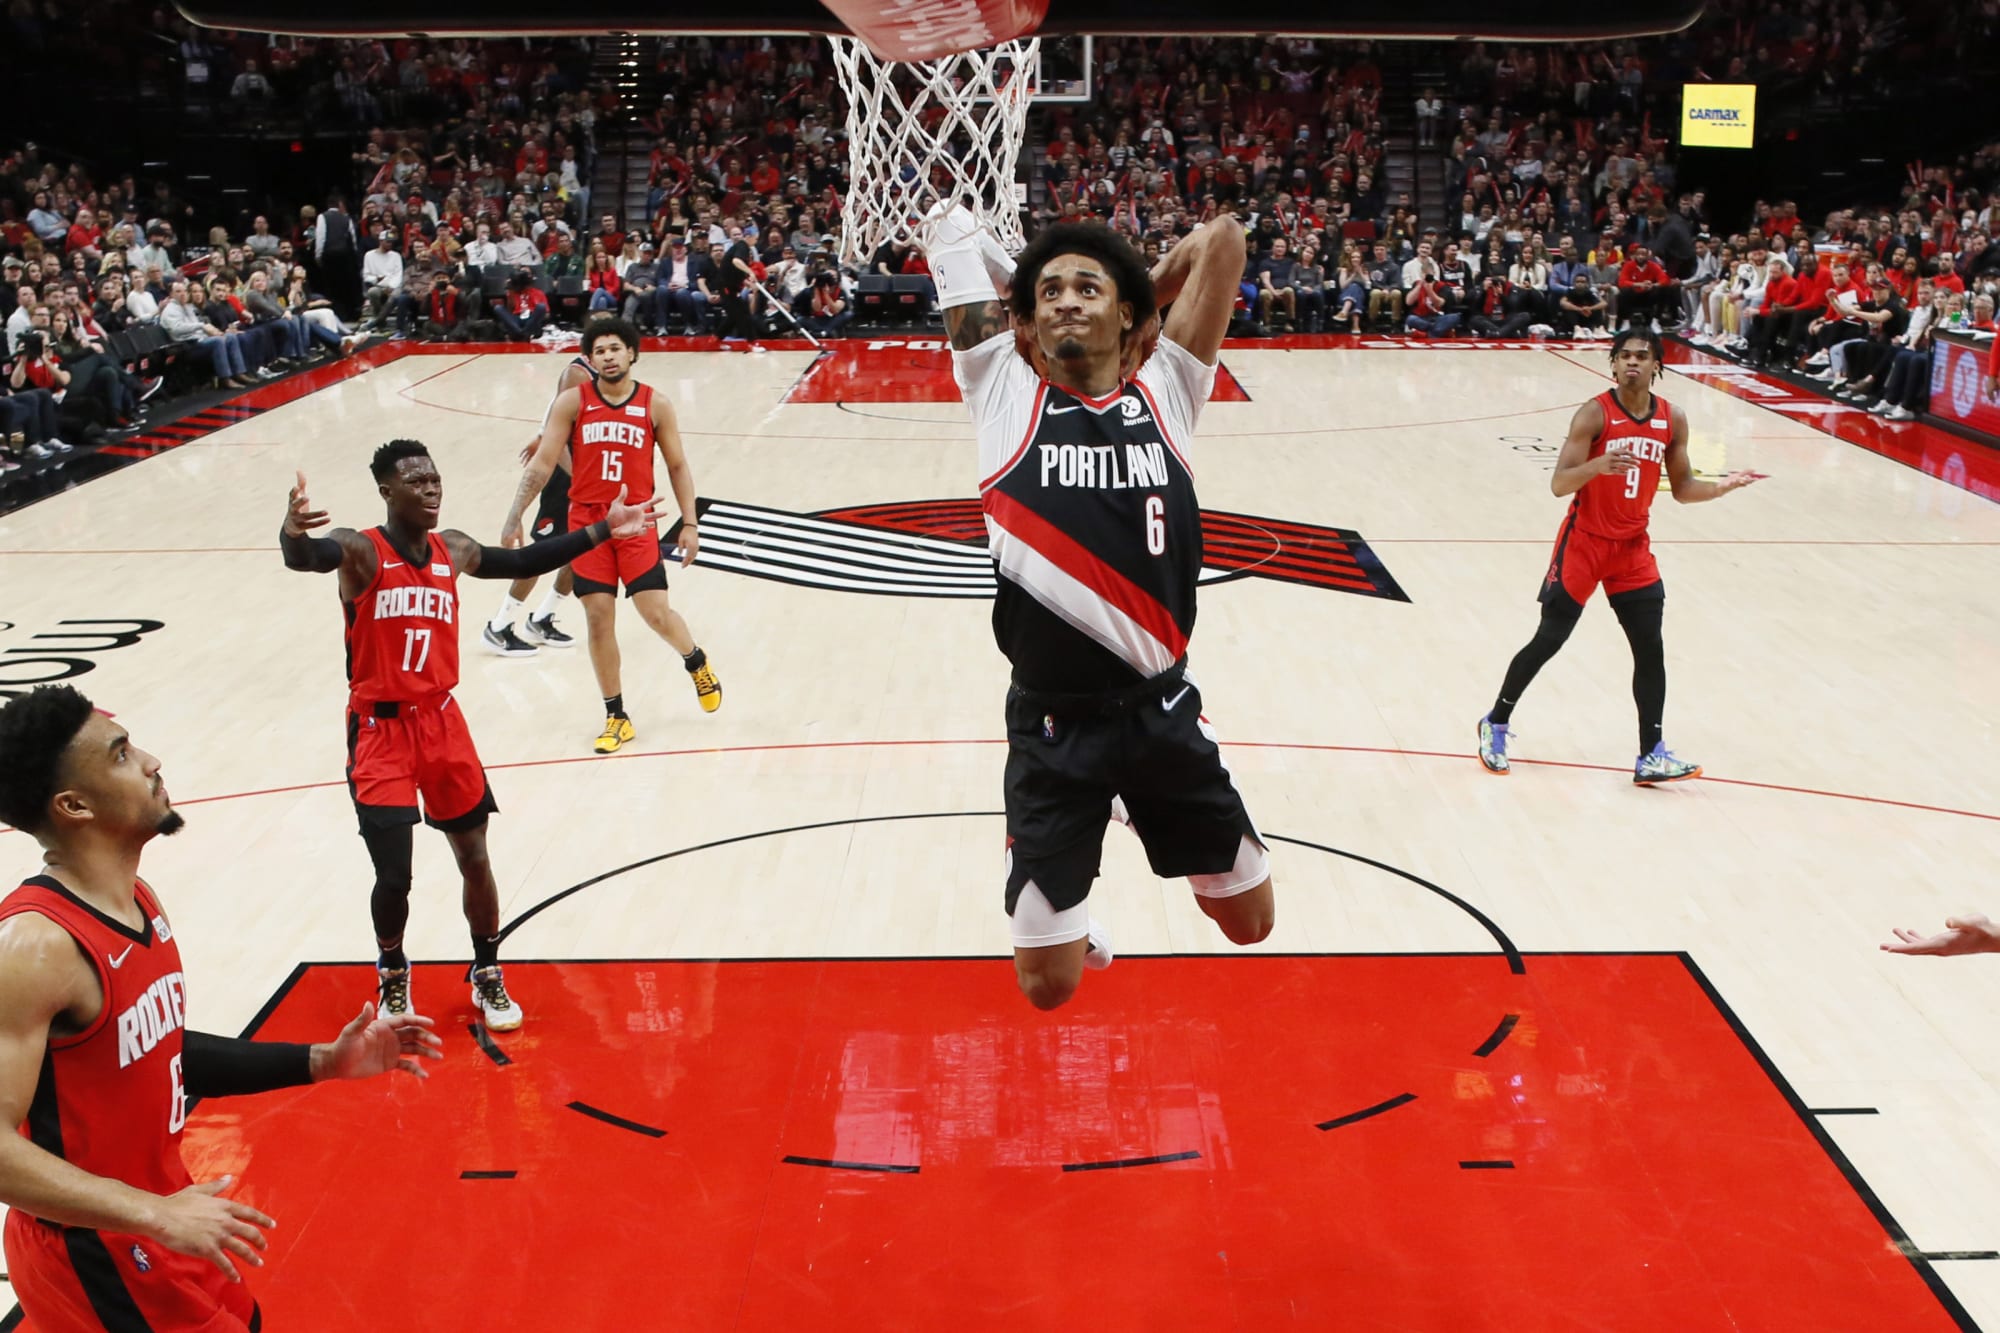 What to expect at Moda Center for Portland Trail Blazers games